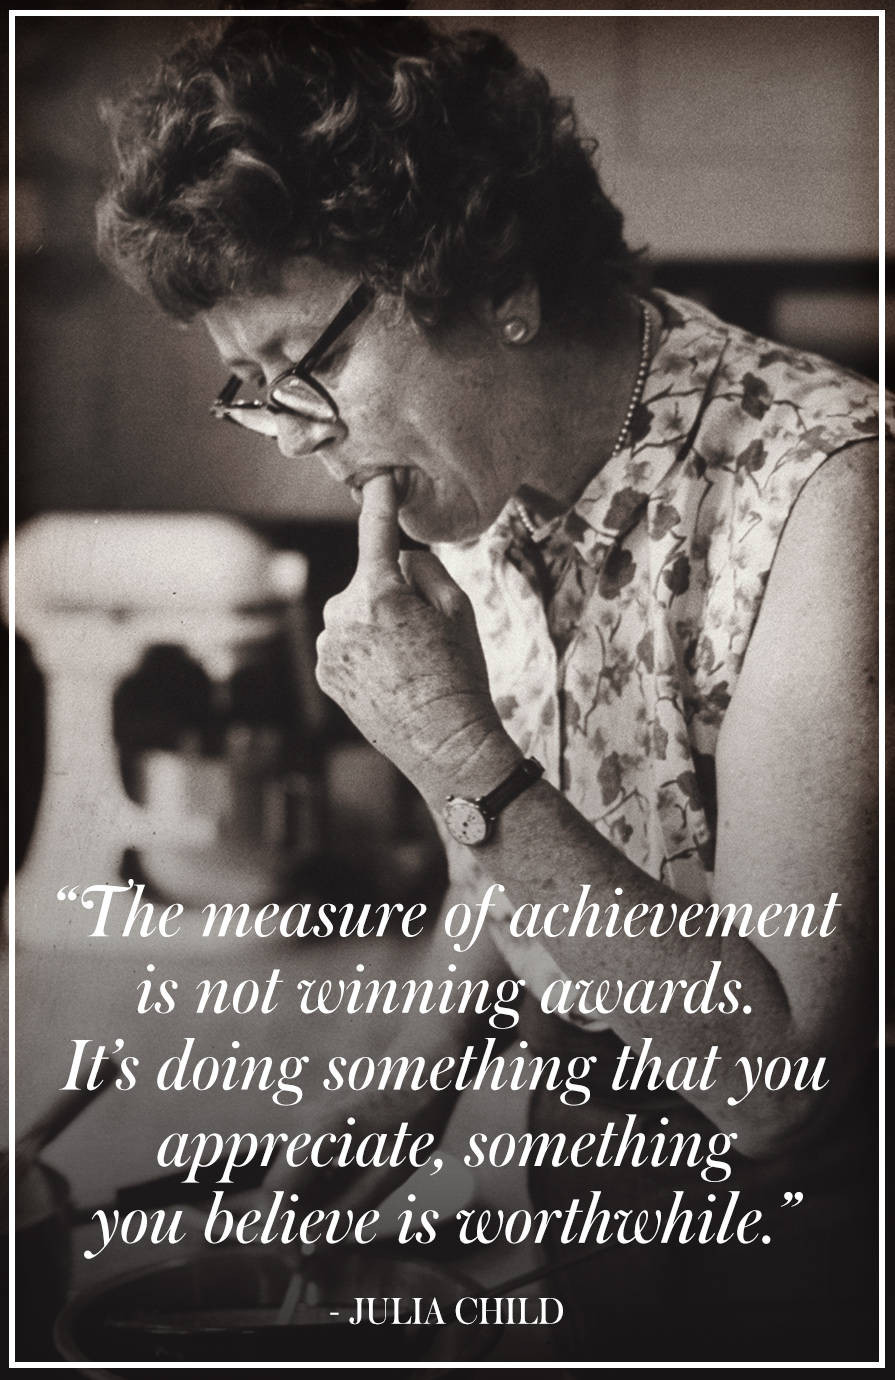 Quotes By Julia Child
 Best Julia Child Quotes 10 Best Julia Child Quotes